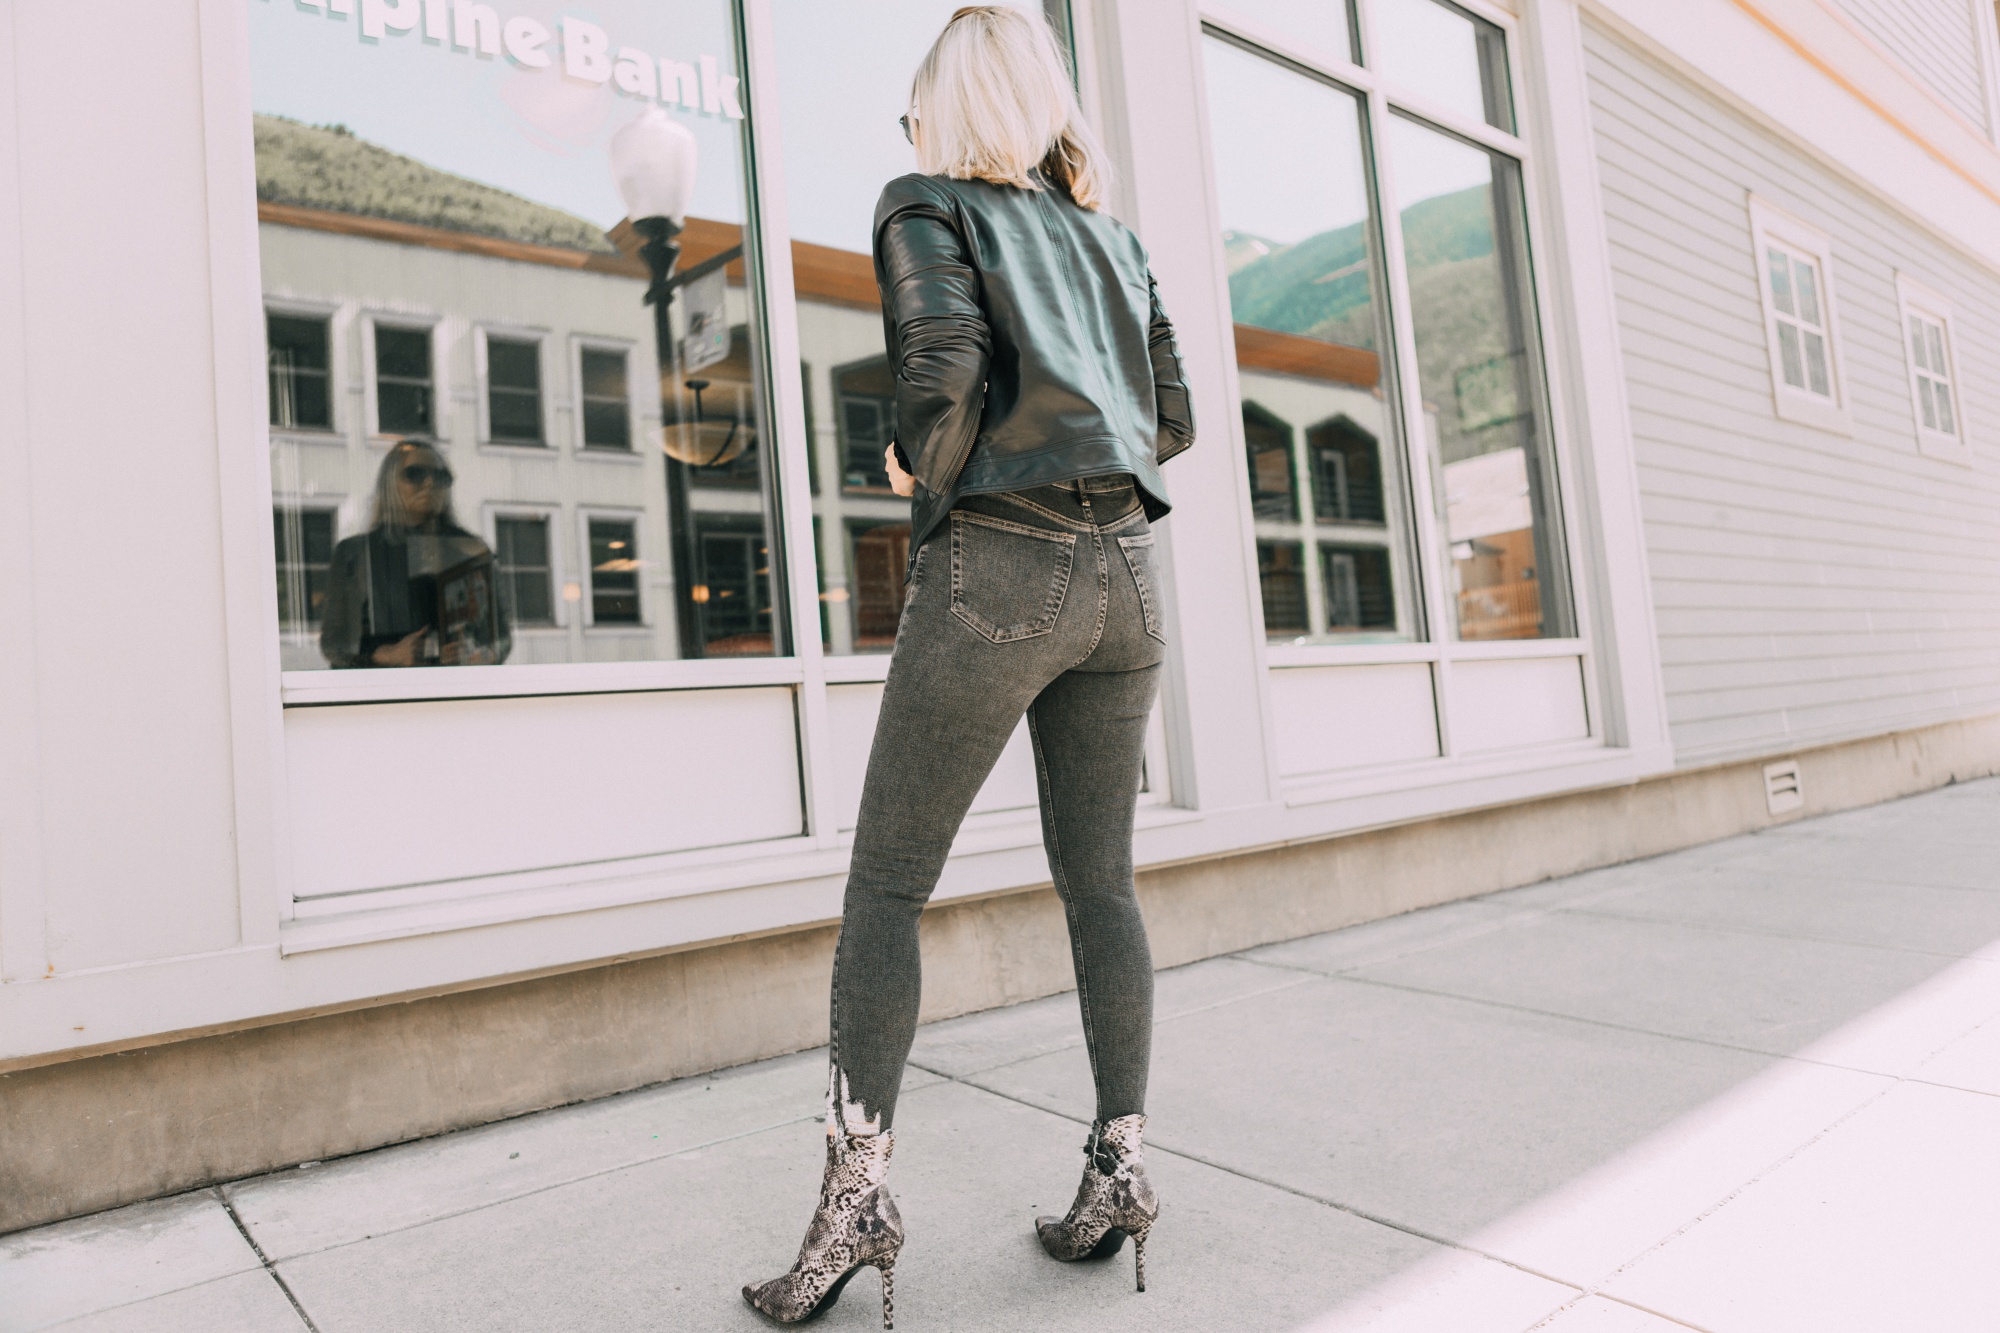 Leather Moto Jacket, Fashion blogger over 40 Erin Busbee of BusbeeStyle.com featuring the Chelsea28 black leather jacket from the Nordstrom Anniversary Sale 2019 styled with the velvet leopard bodysuit, Topshop jeans, and Charles Davidson python print booties from Nordstrom in Telluride, Colorado